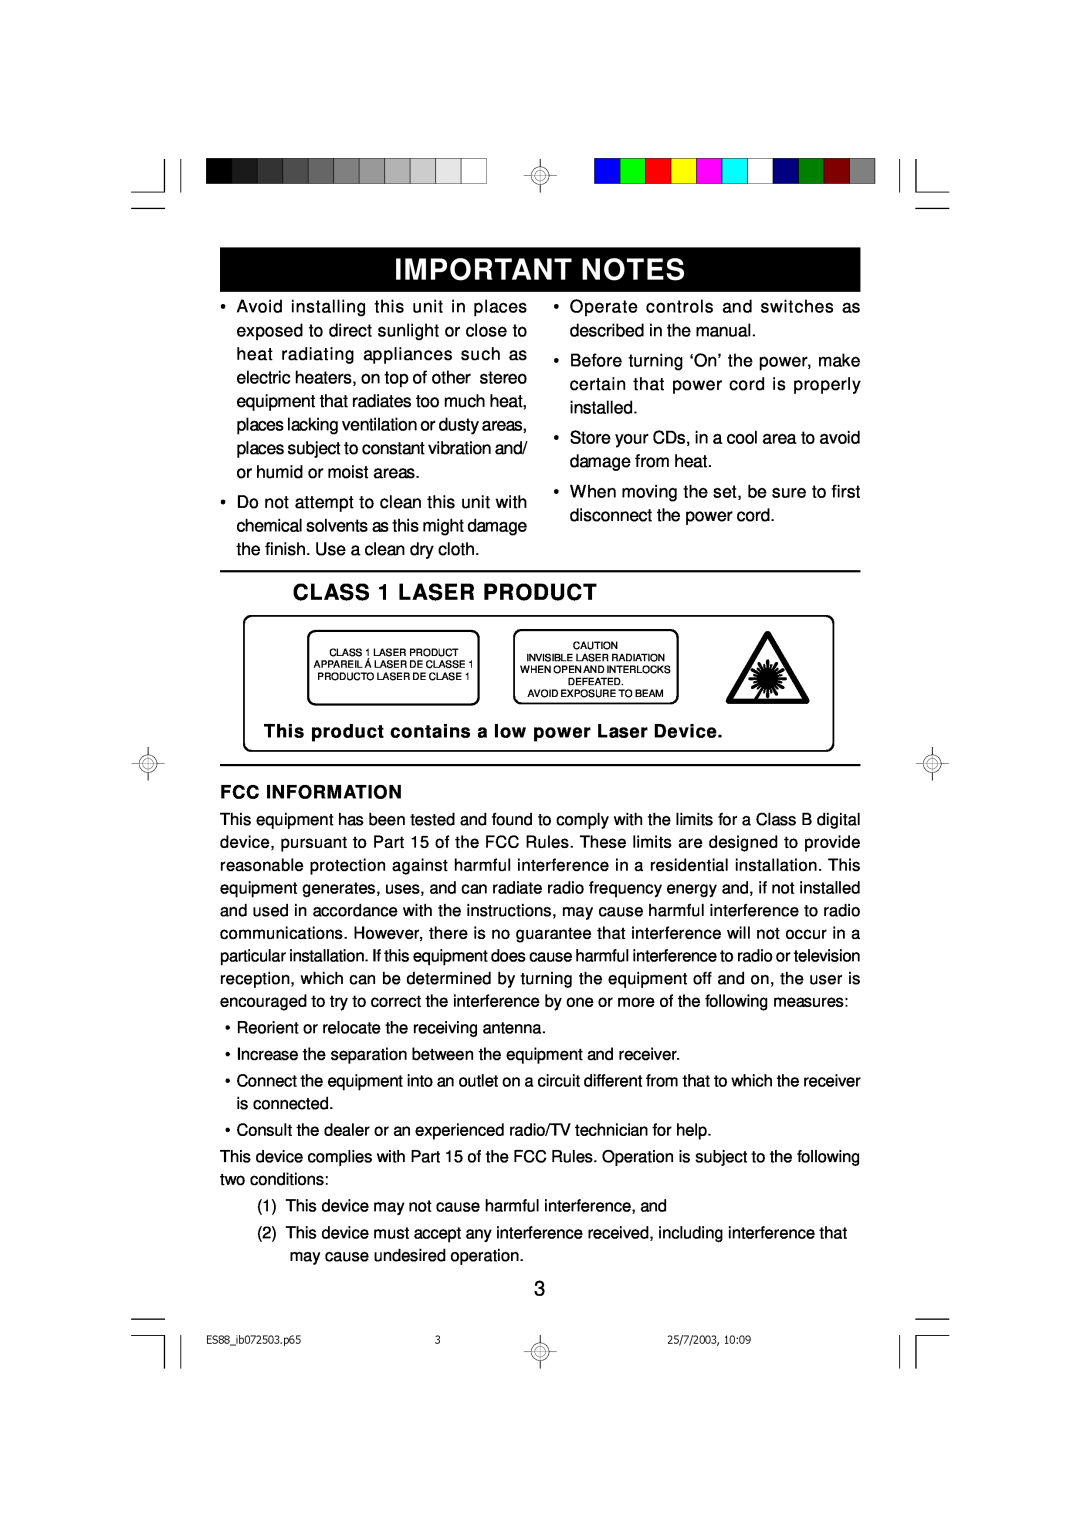 Emerson ES88 owner manual Important Notes, CLASS 1 LASER PRODUCT 